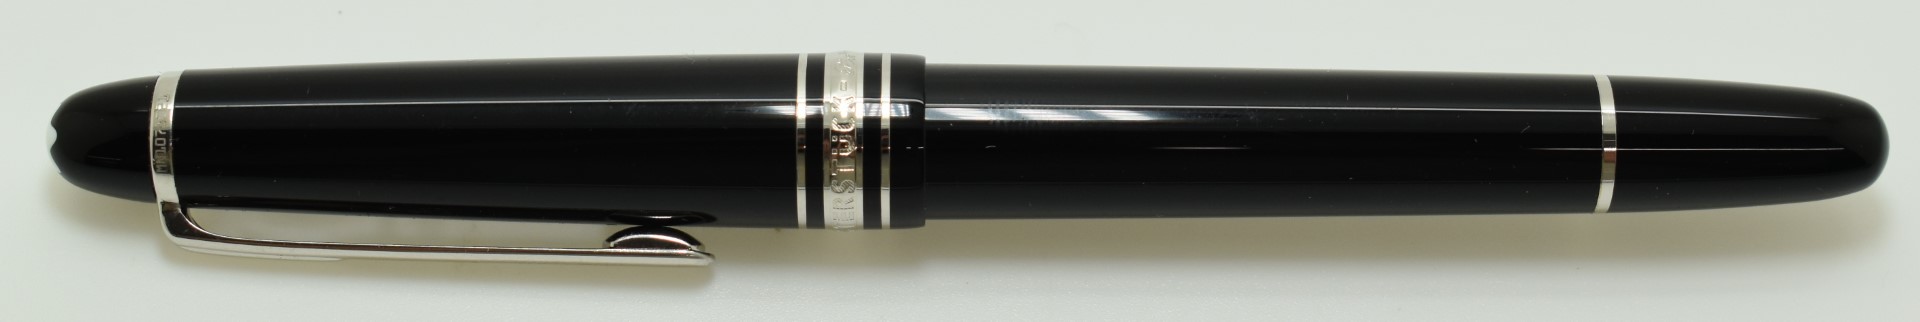 Montblanc Meisterstuck fountain pen with 14k gold nib marked 4810, in original box with service - Image 6 of 16